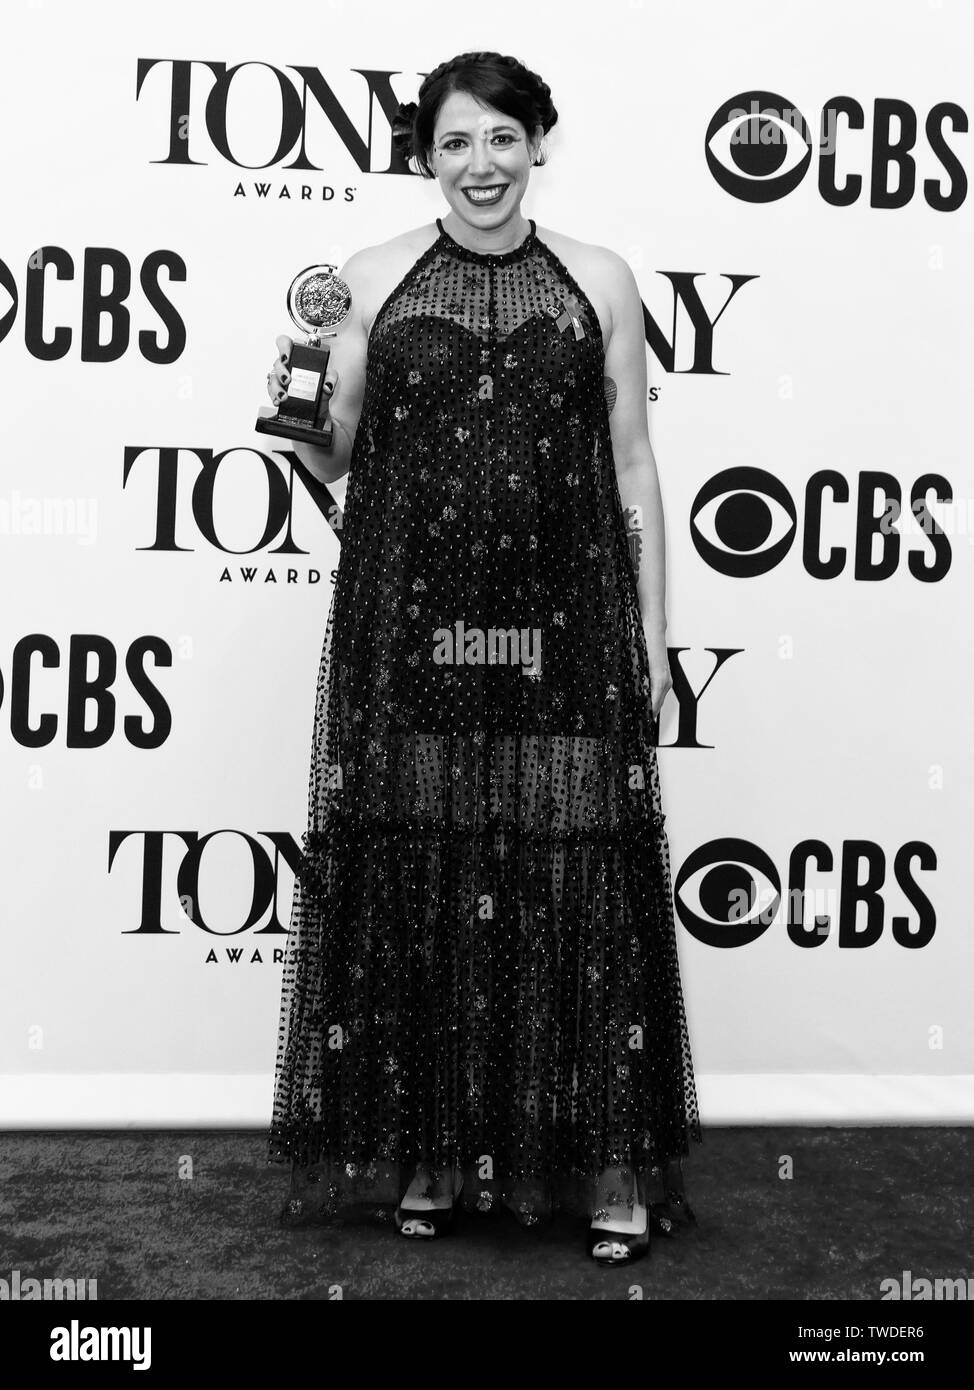 New York, NY - June 09, 2019: Rachel Chavkin - Best Direction of a Musical - 'Hadestown'  poses in the press room for the 73rd Annual Tony Awards Stock Photo